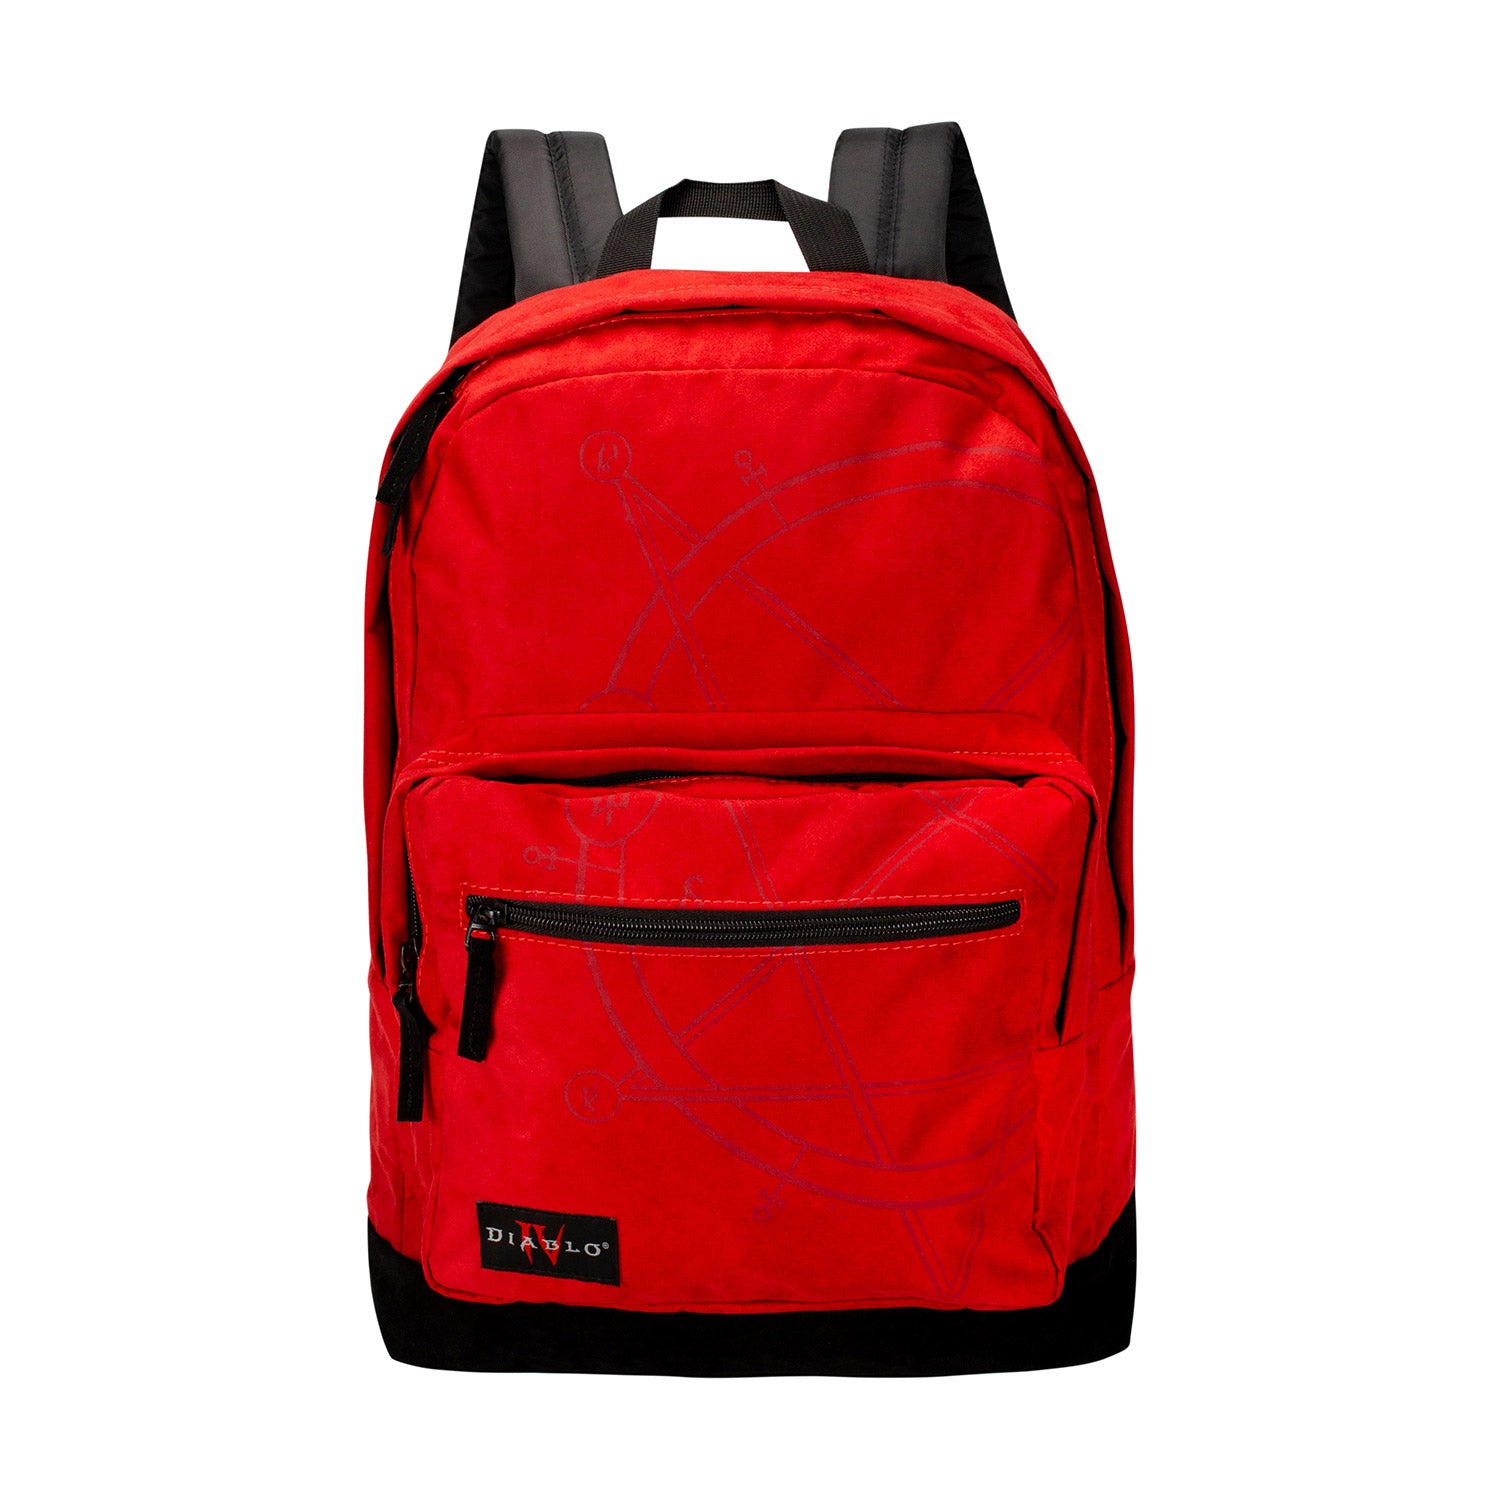 Diablo IV Red Backpack - Front View of Backpack